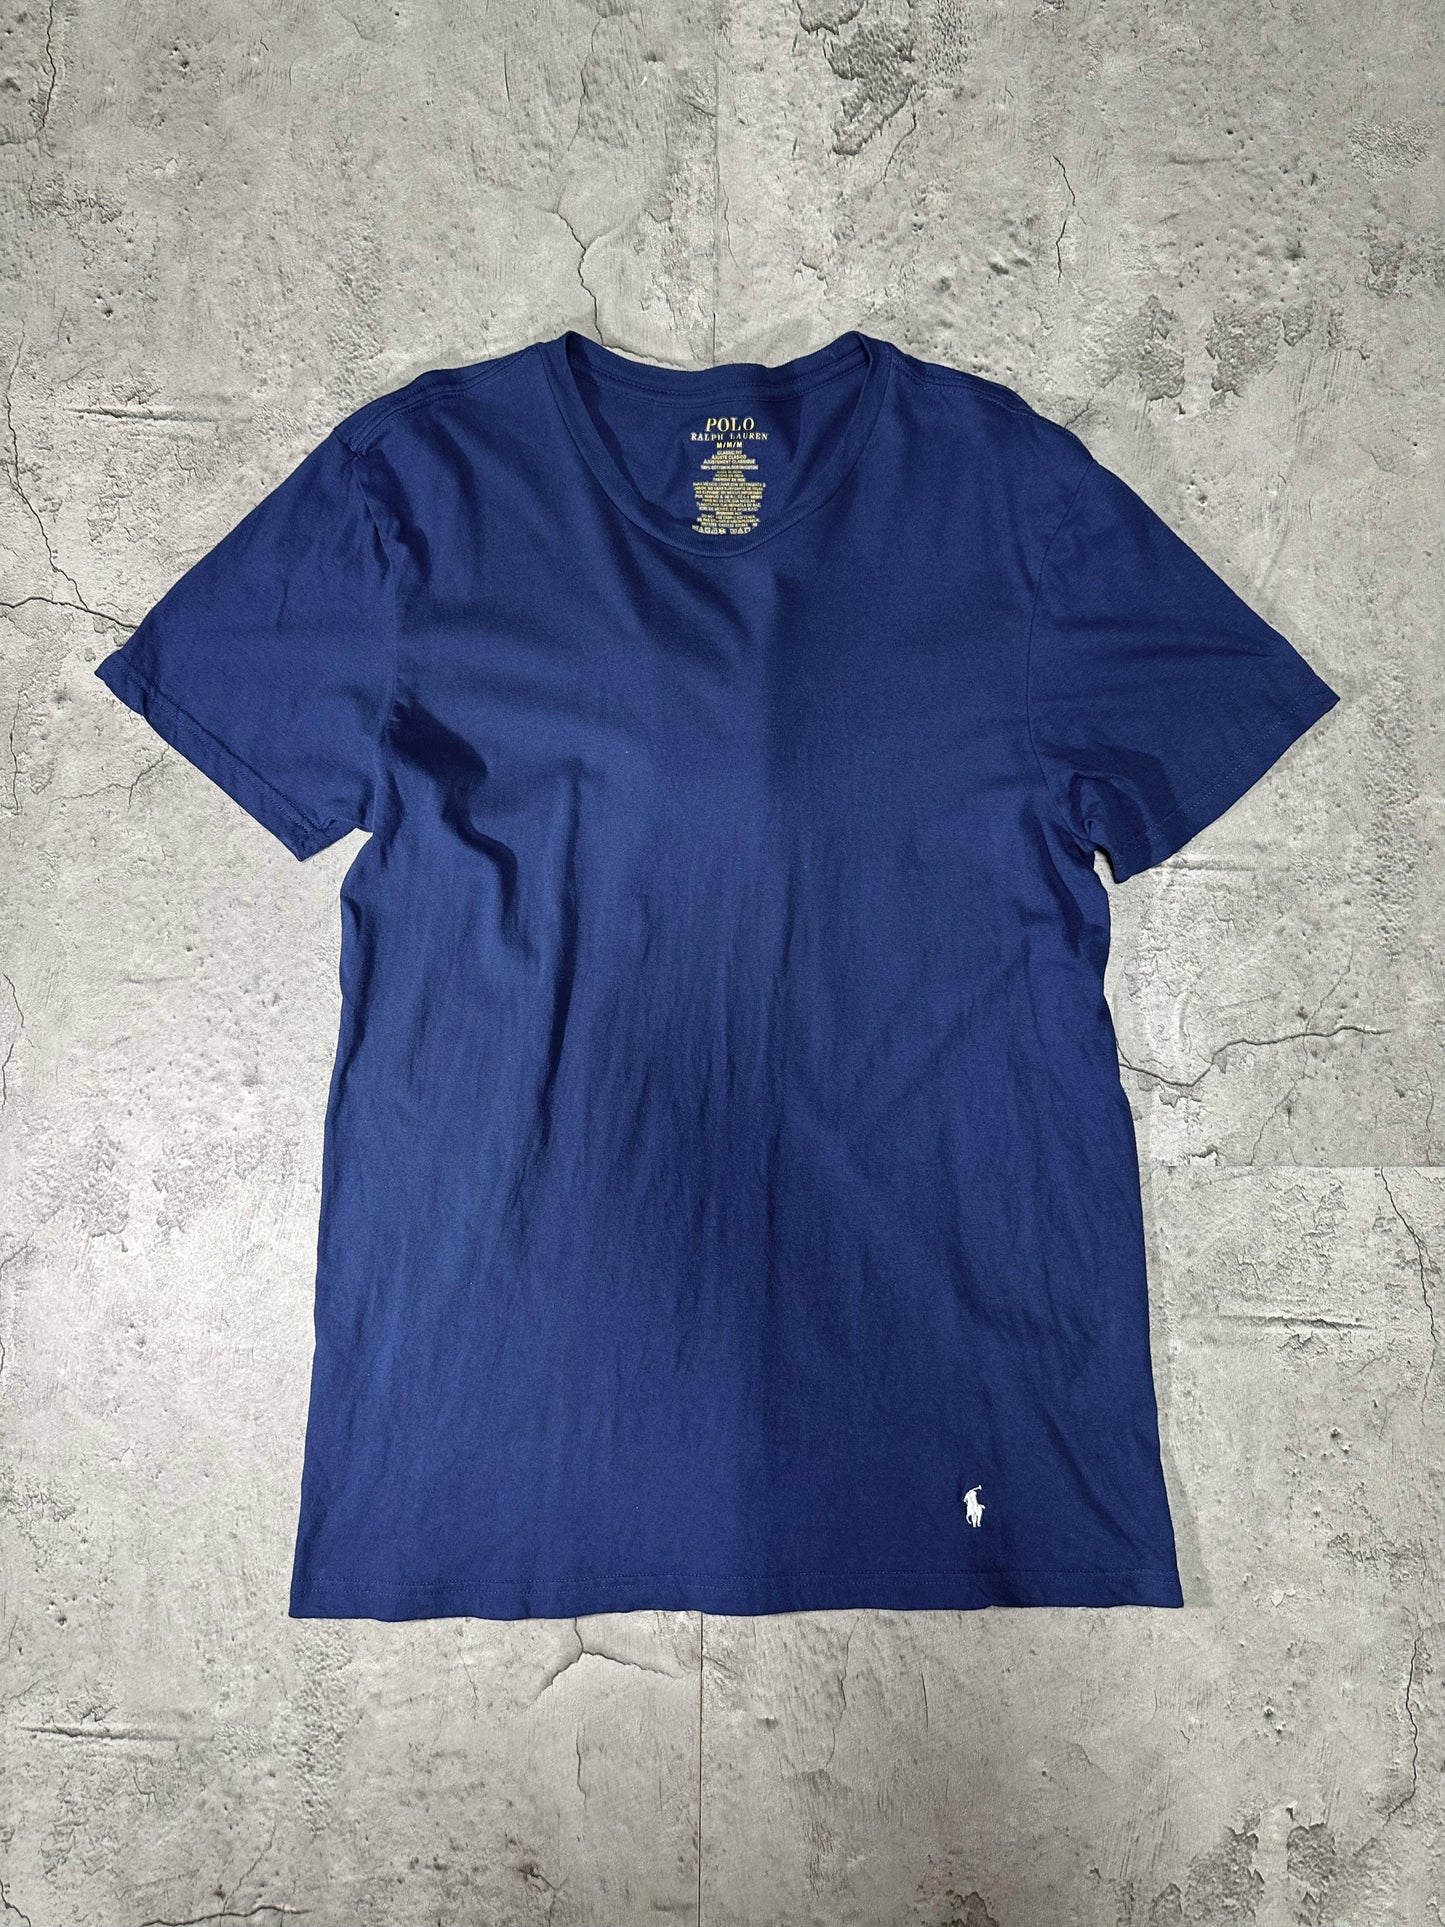 Polo Ralph Lauren one point embroidery short sleeve T-shirt